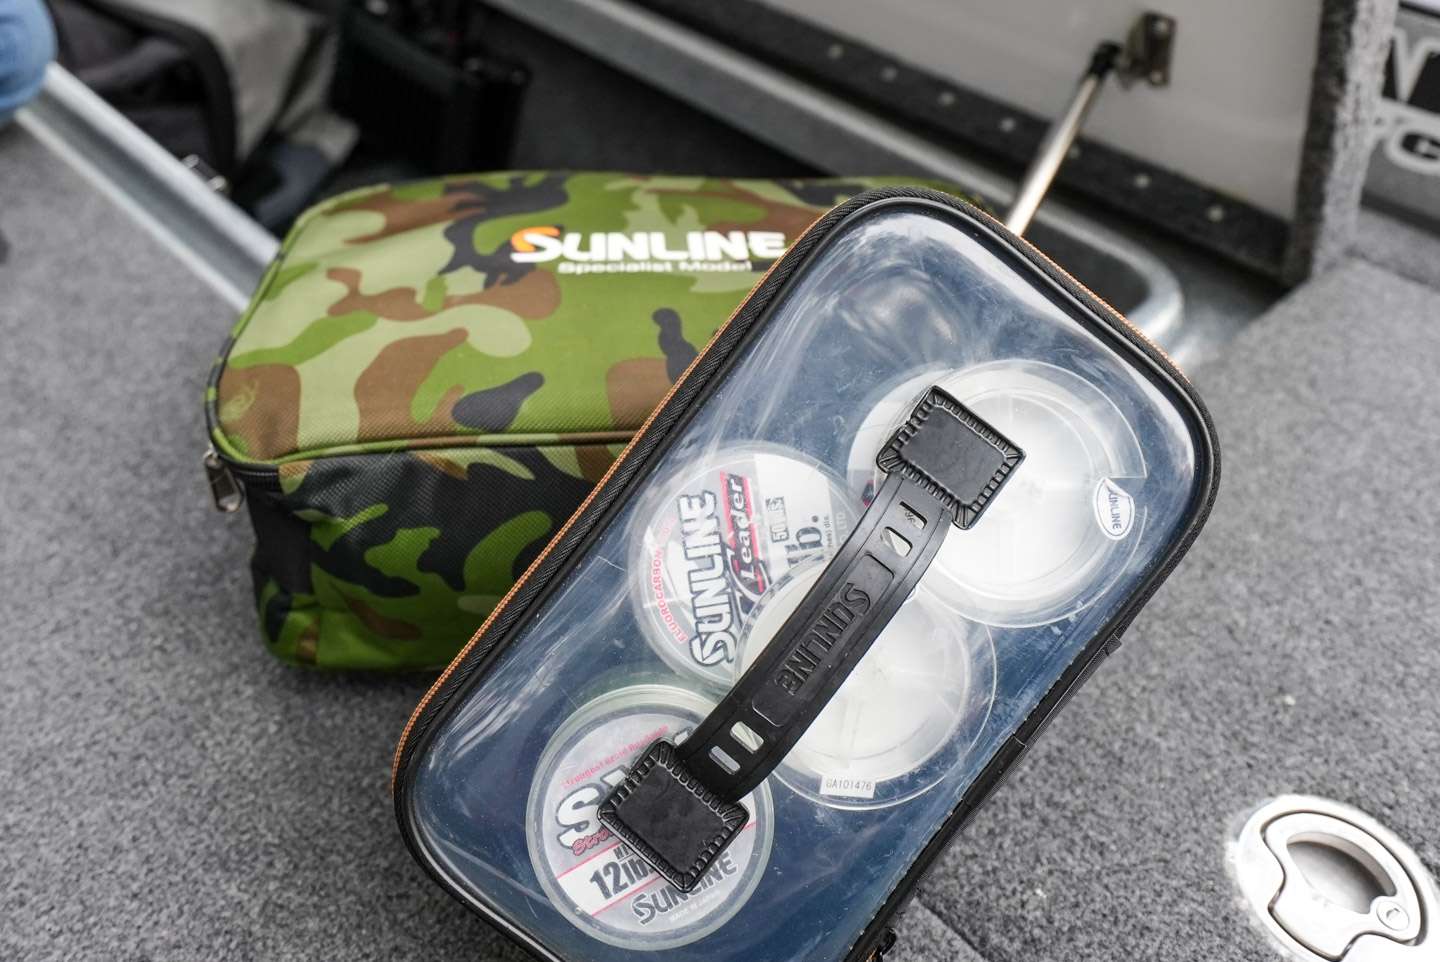 Palmer keeps a wide variety of Sunline fishing line in the boat so he can make adjustments and respool his reels on the fly. 